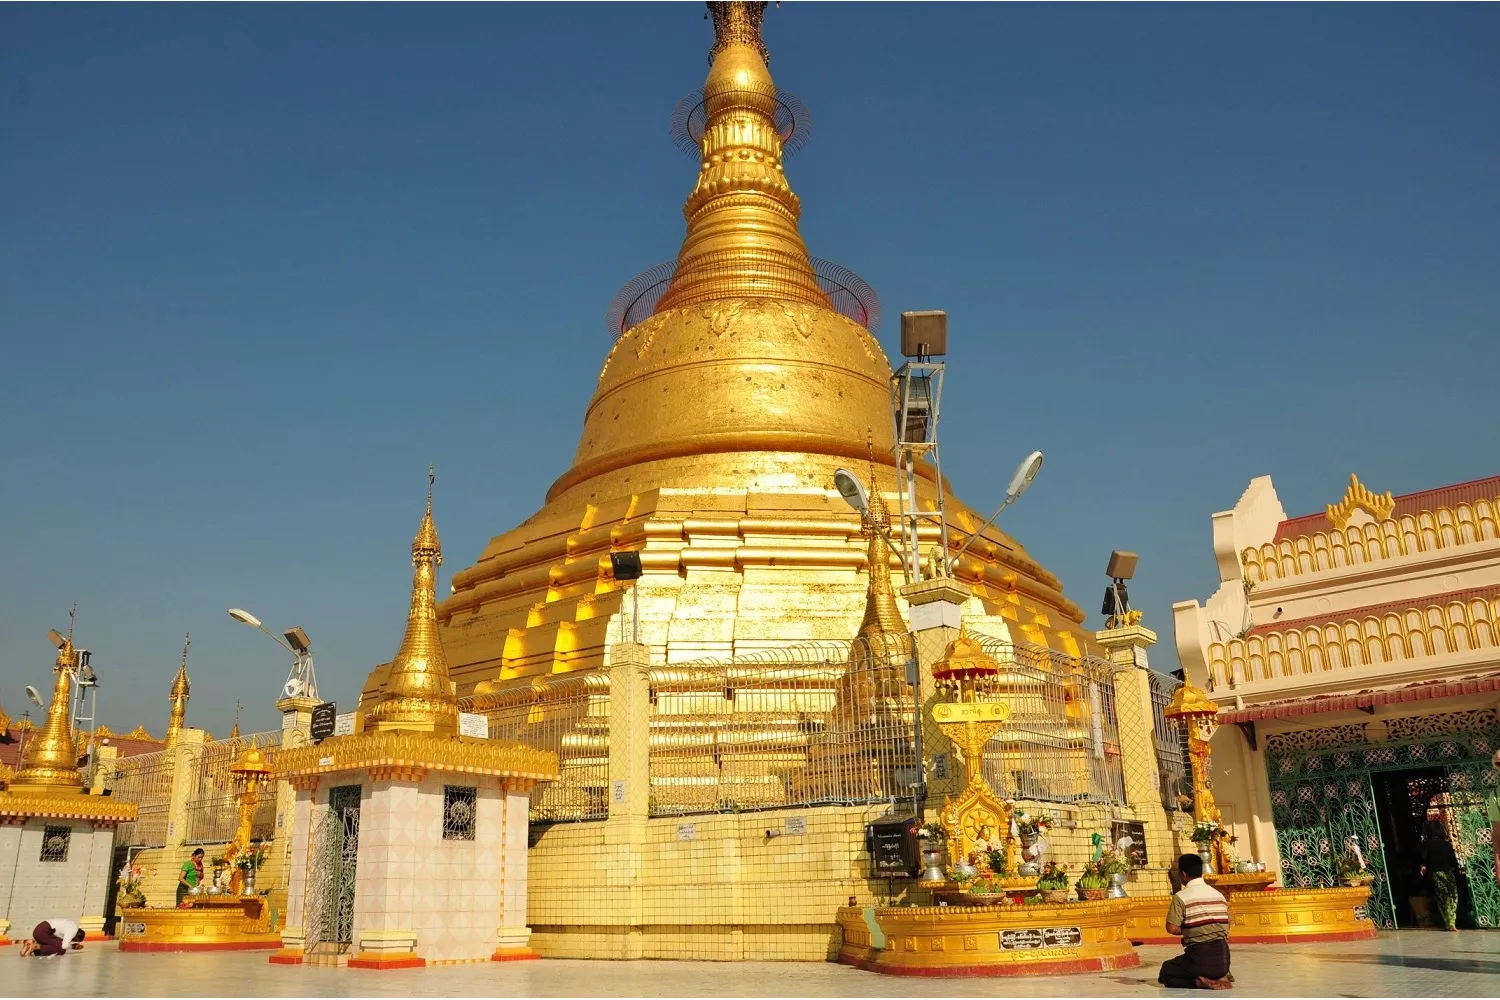 Botataung Pagoda in Myanmar, Central Asia | Architecture - Rated 3.8